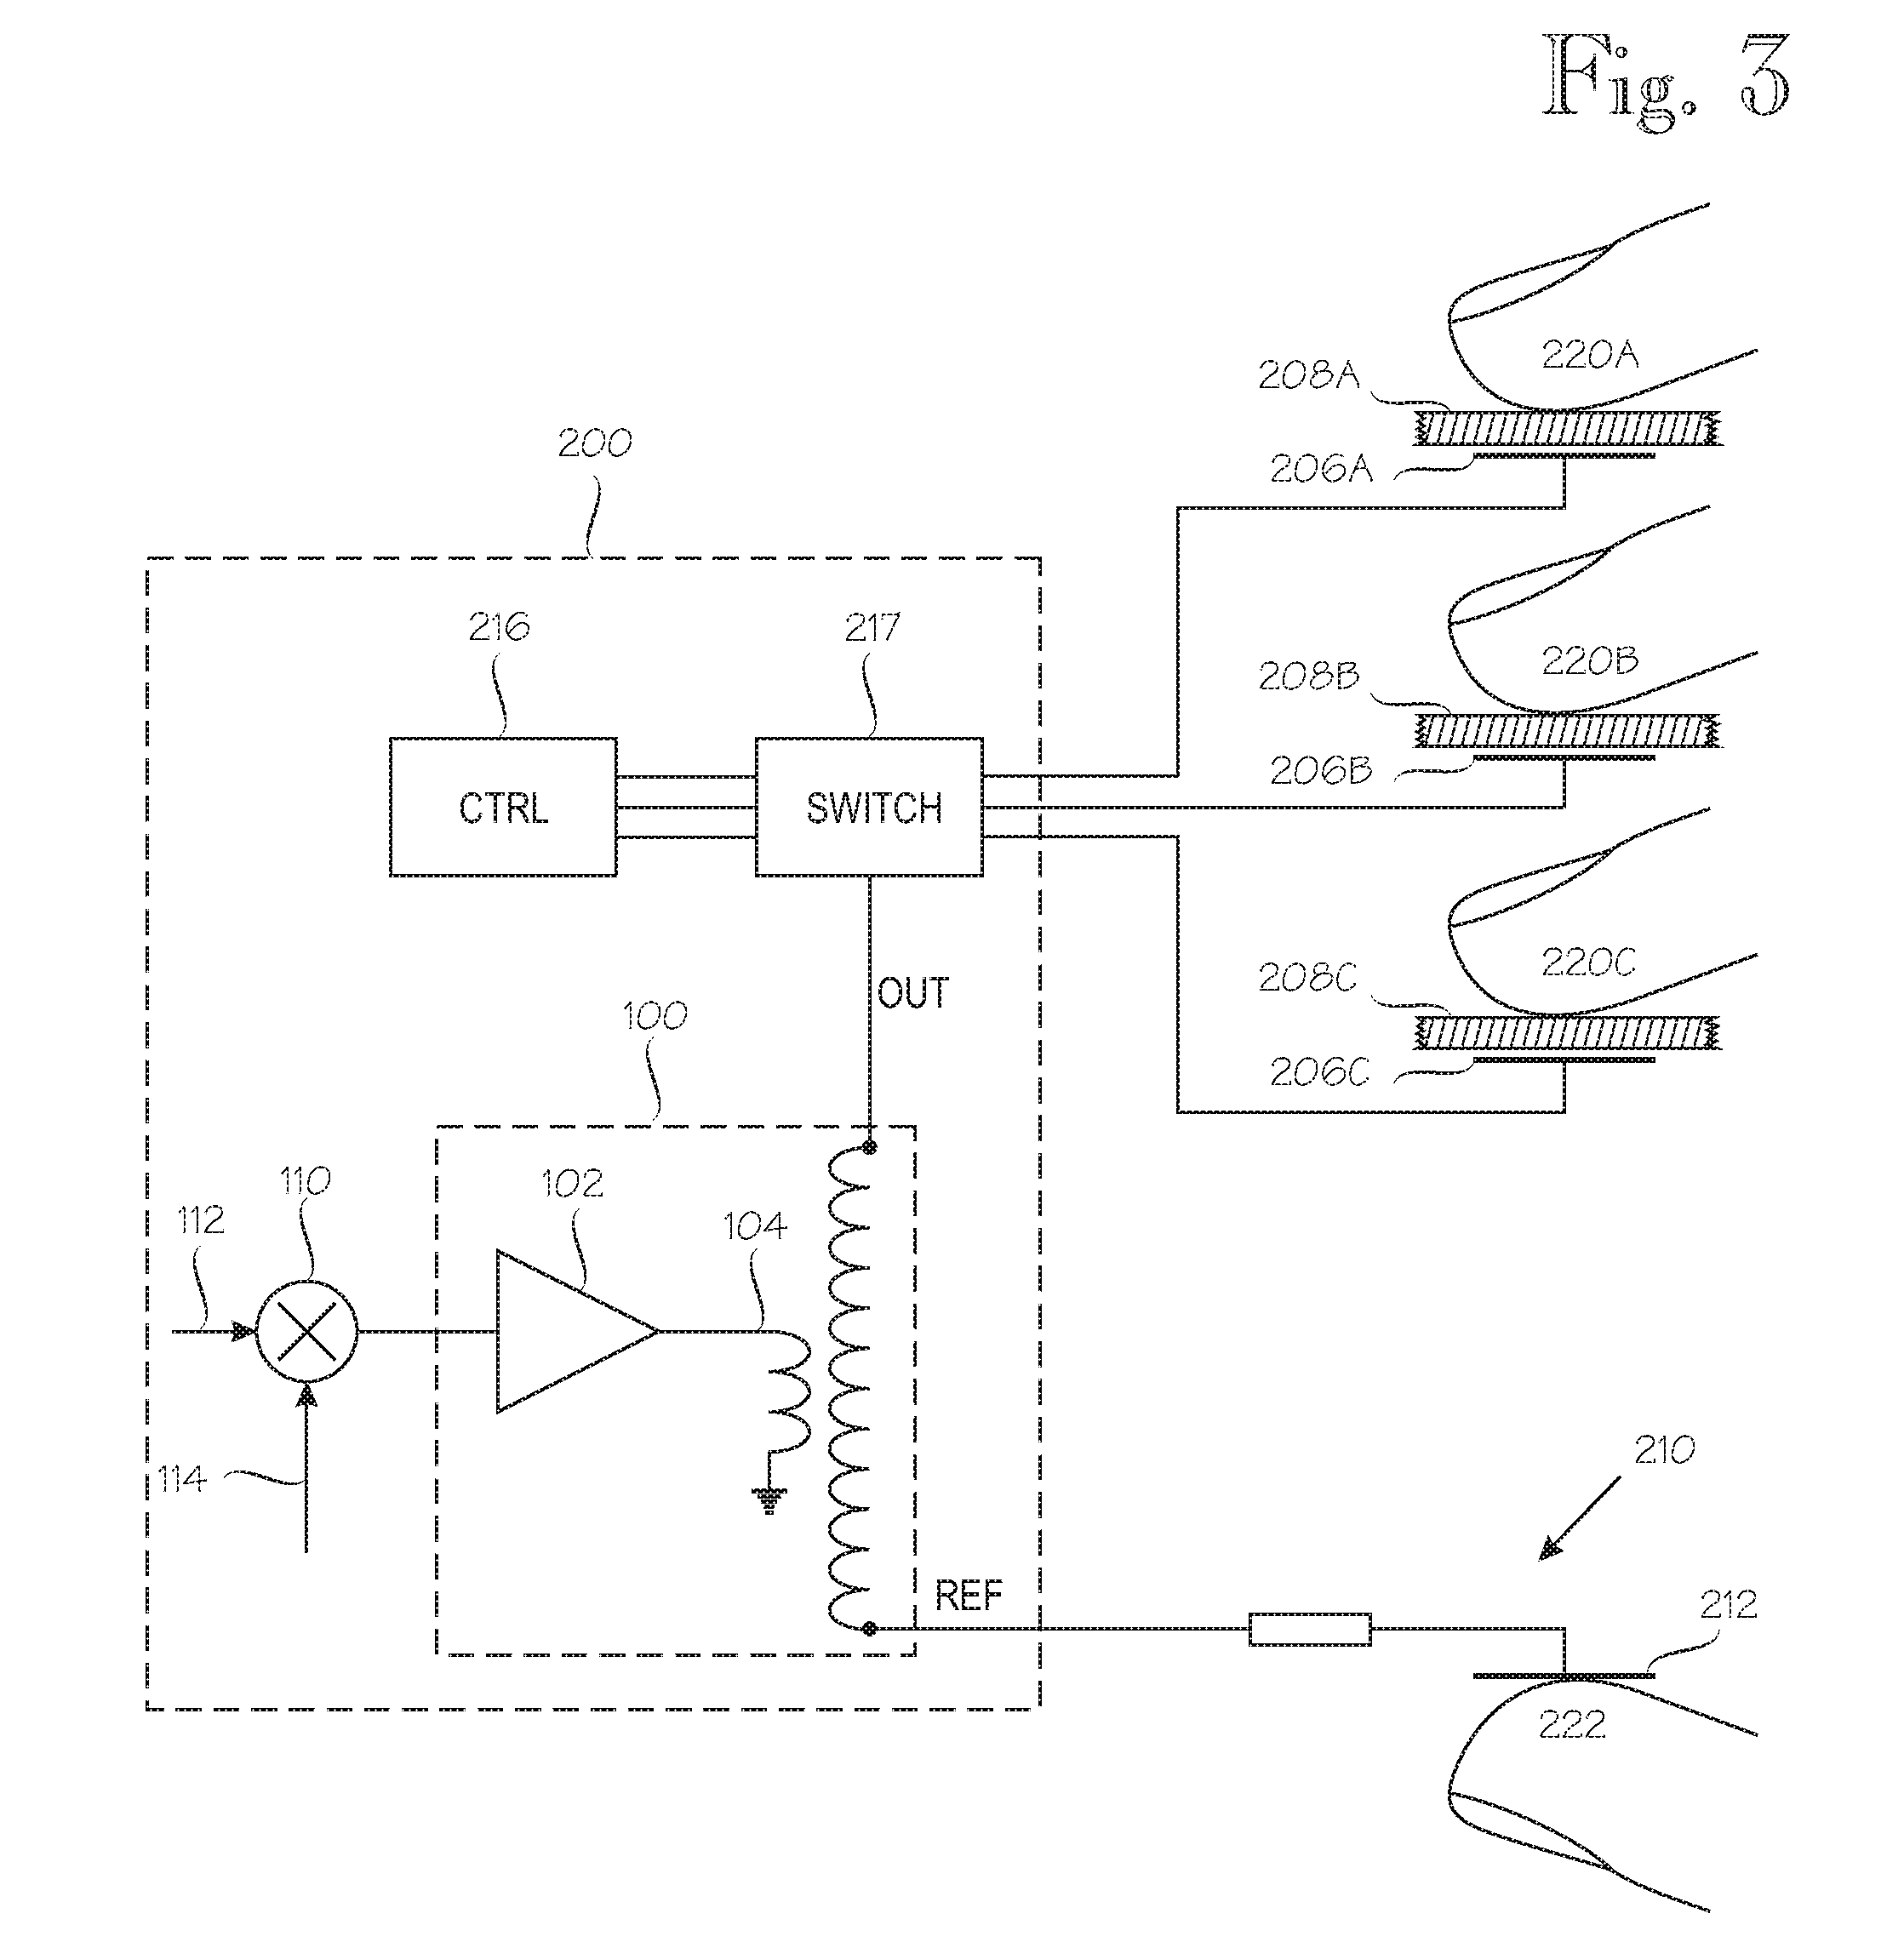 Interface apparatus for touch input and tactile output communication